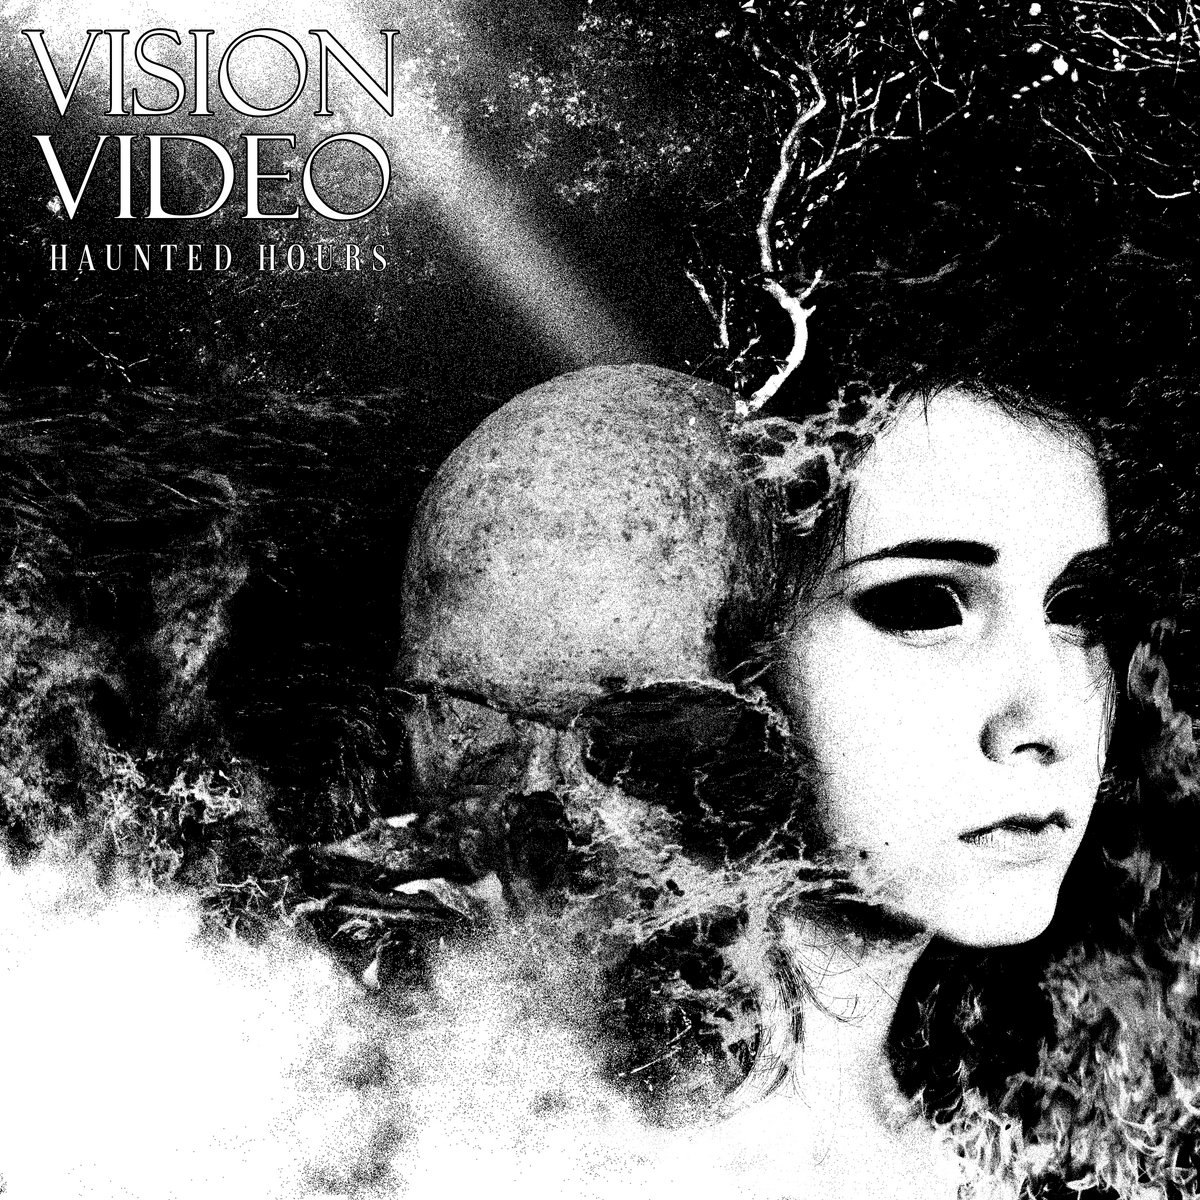 Vision Video, “Haunted Hours”